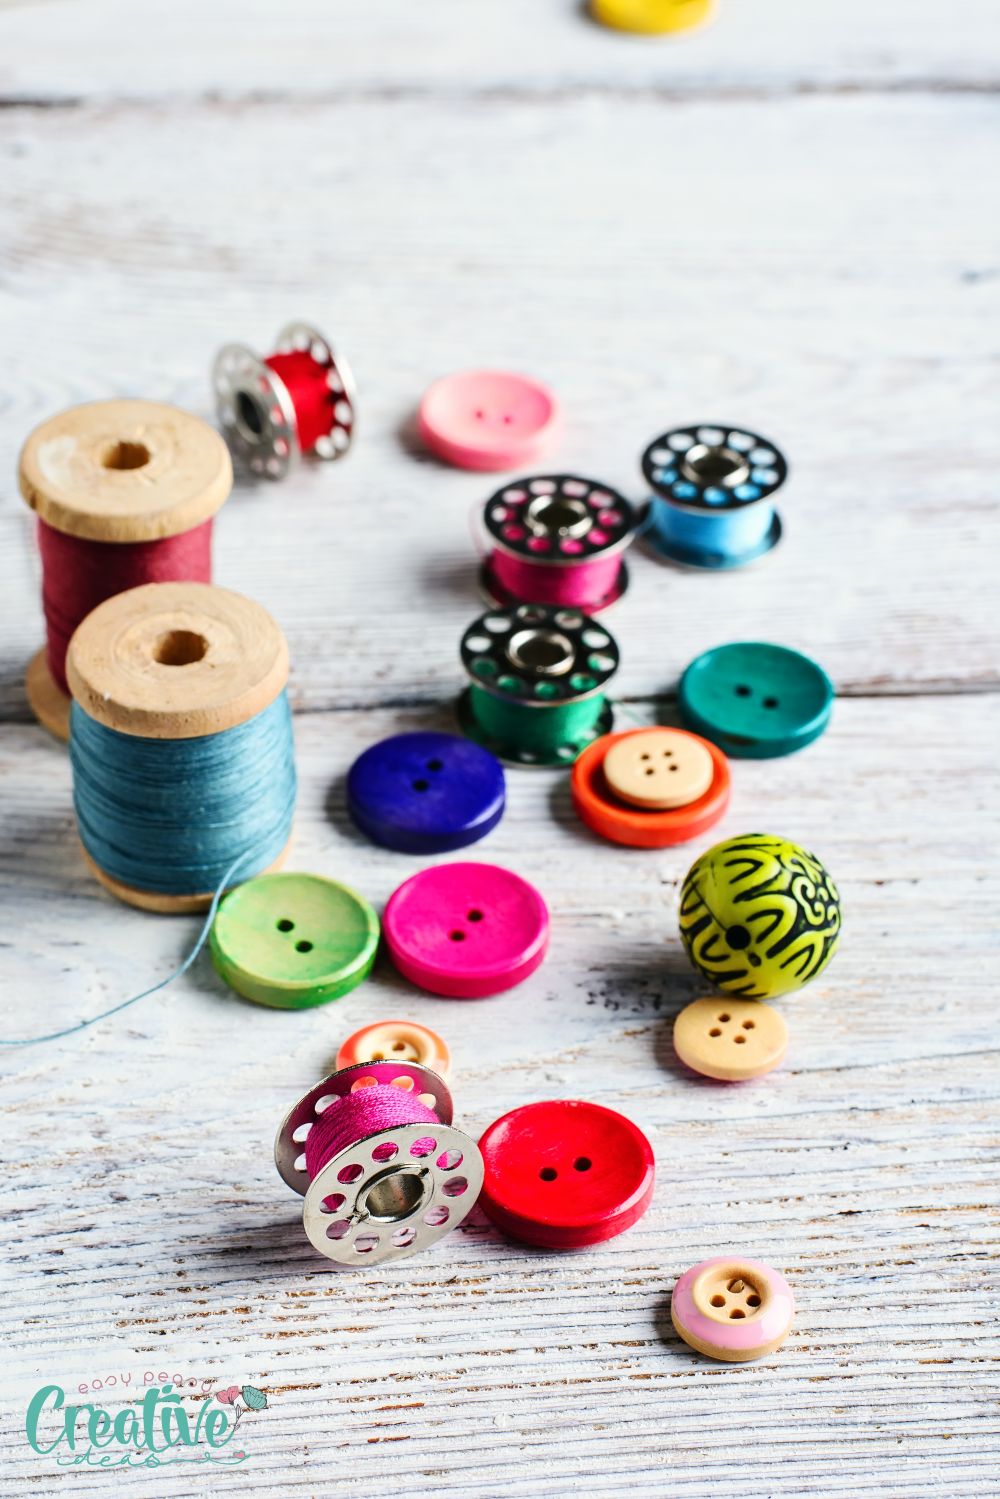 Image of different types of buttons for sewing